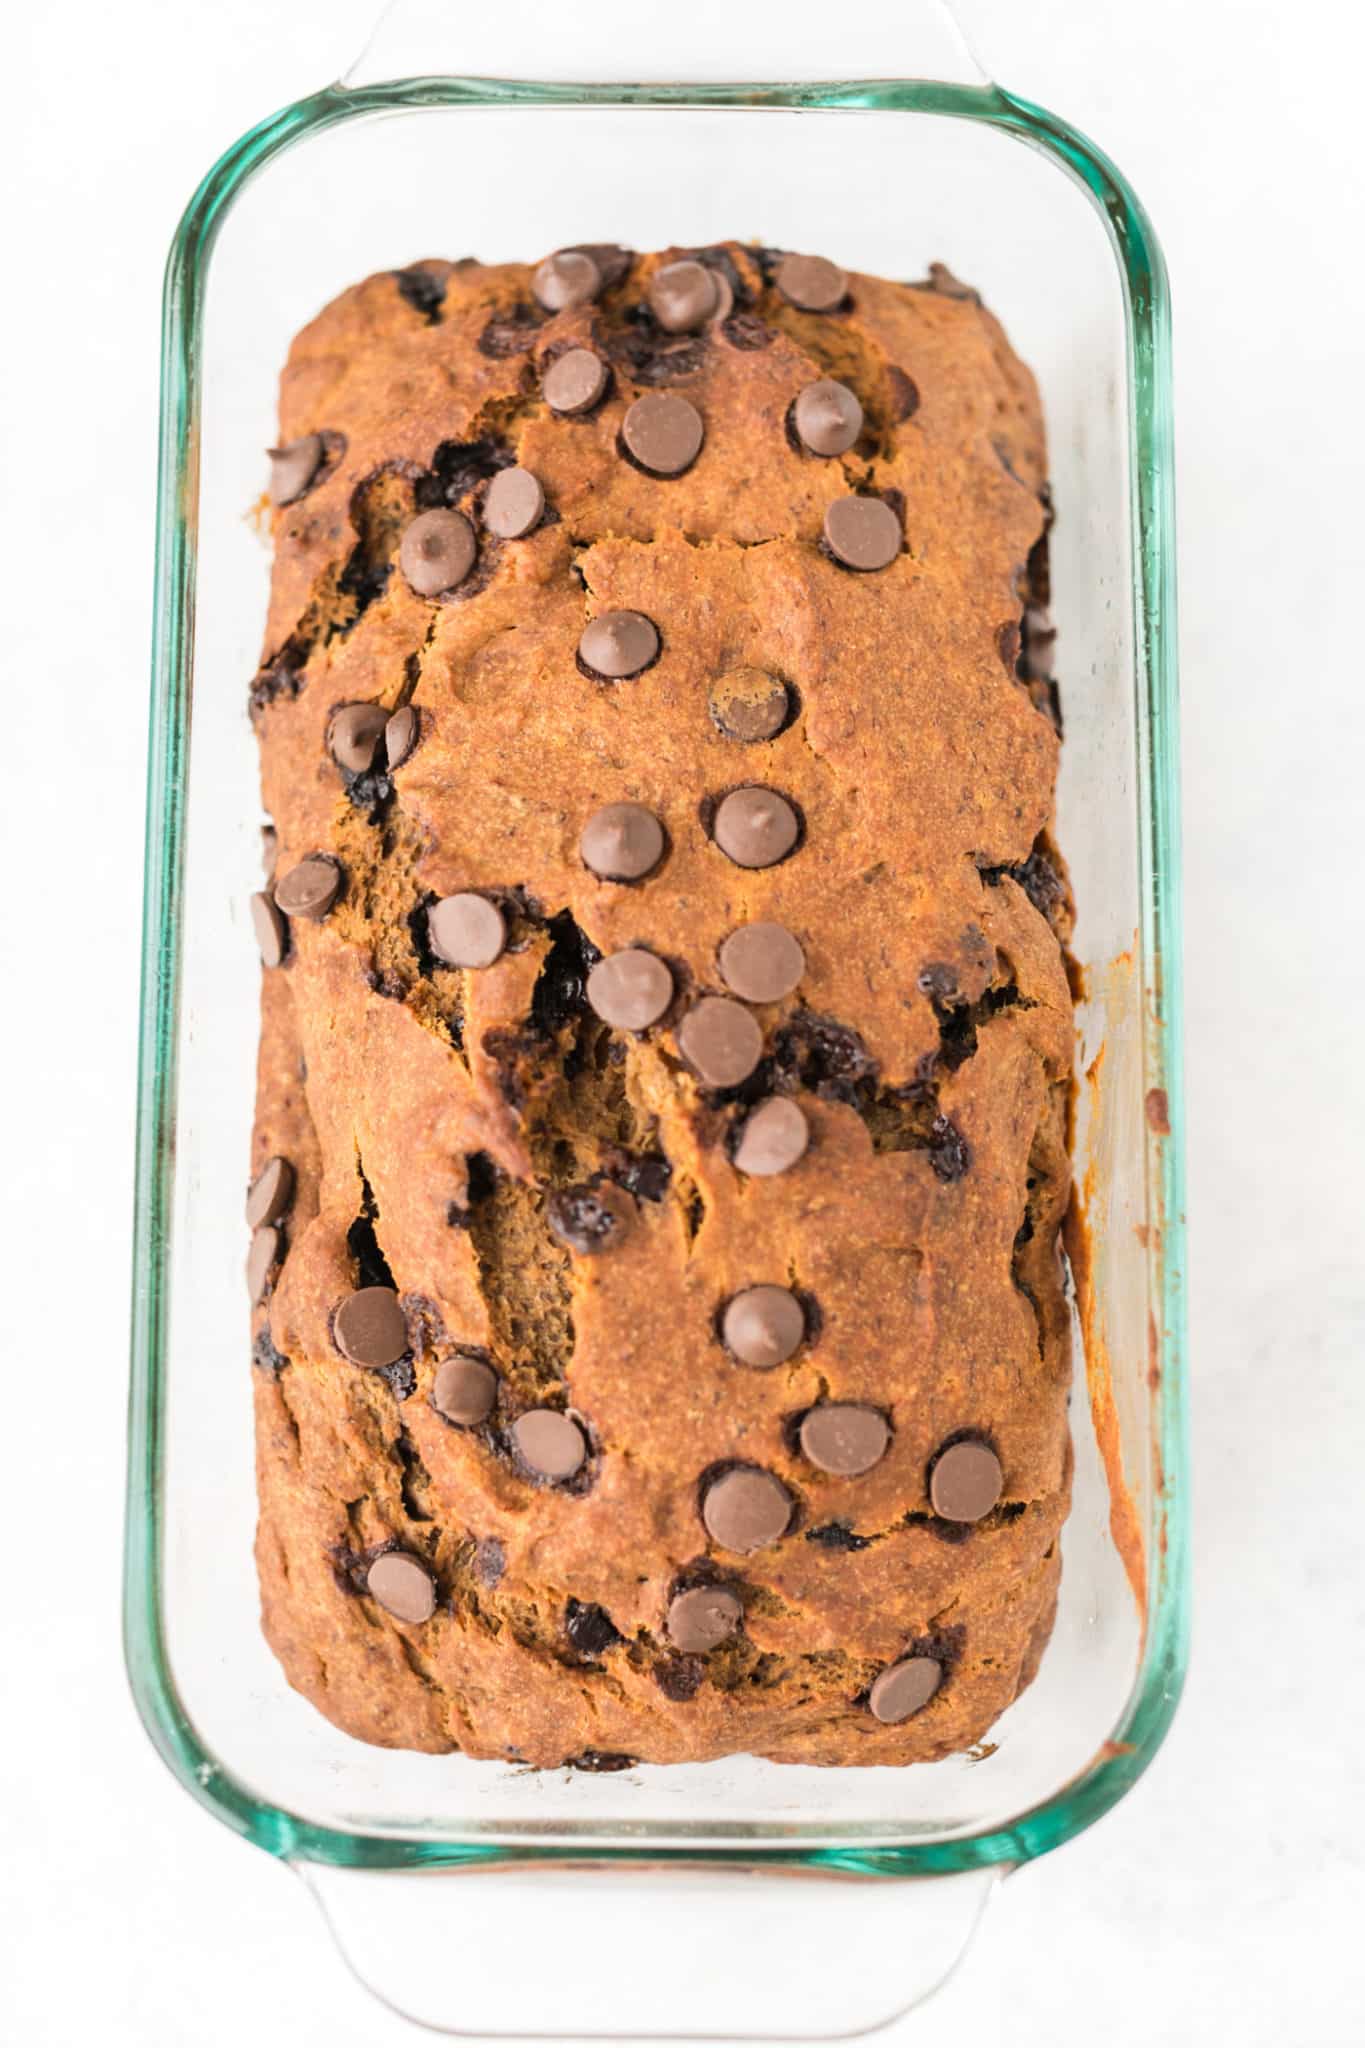 baked dairy-free banana bread in pan.